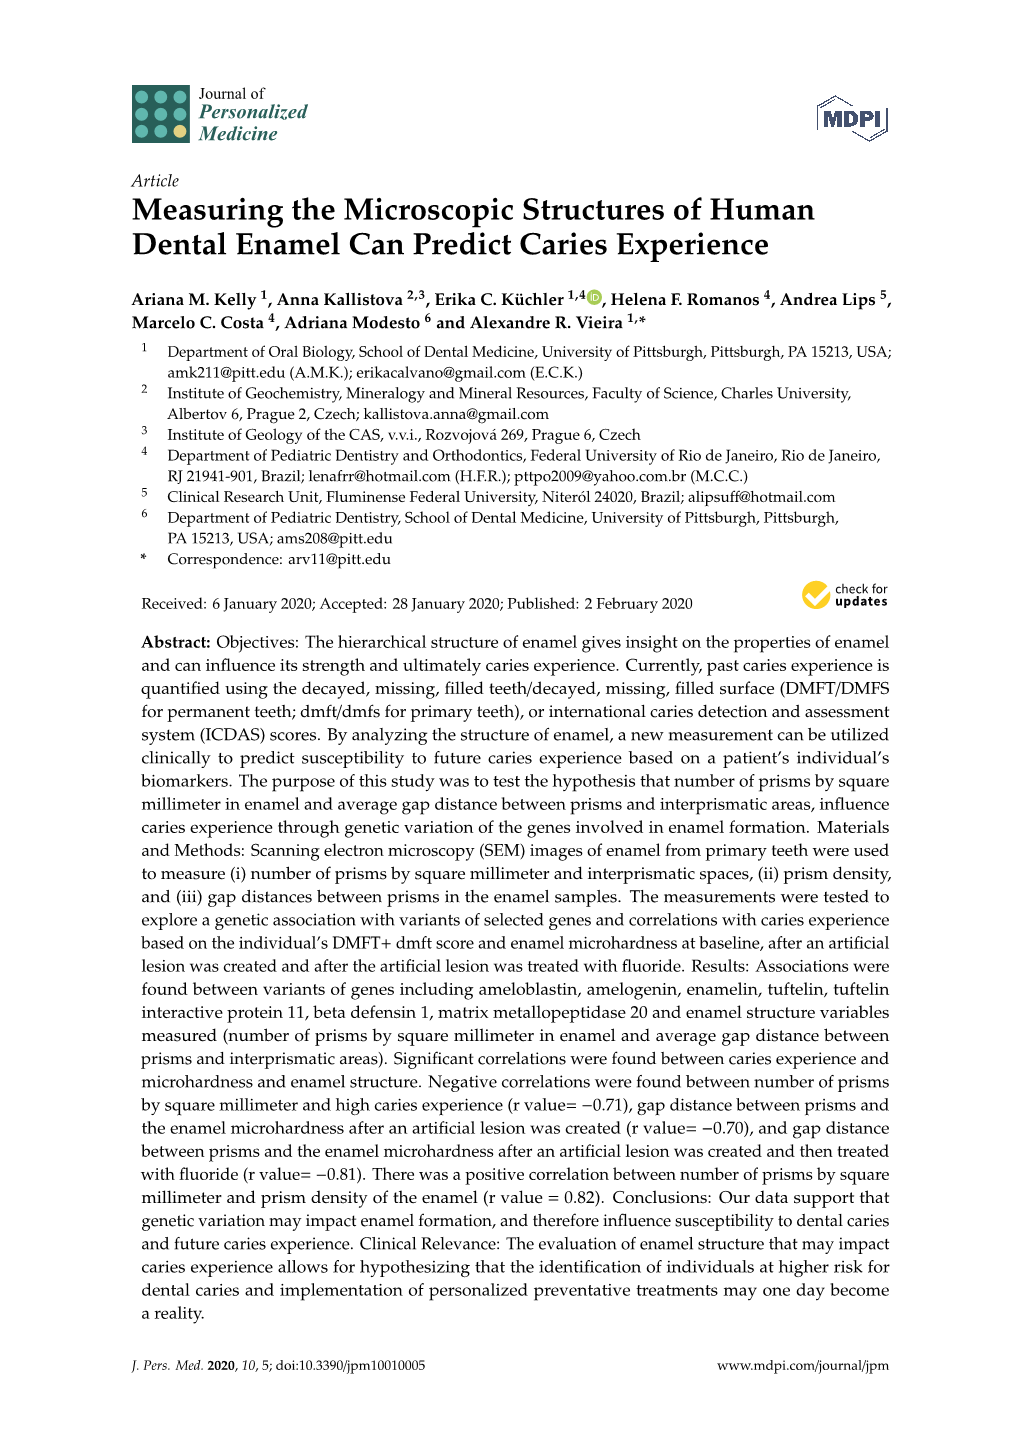 Measuring the Microscopic Structures of Human Dental Enamel Can Predict Caries Experience